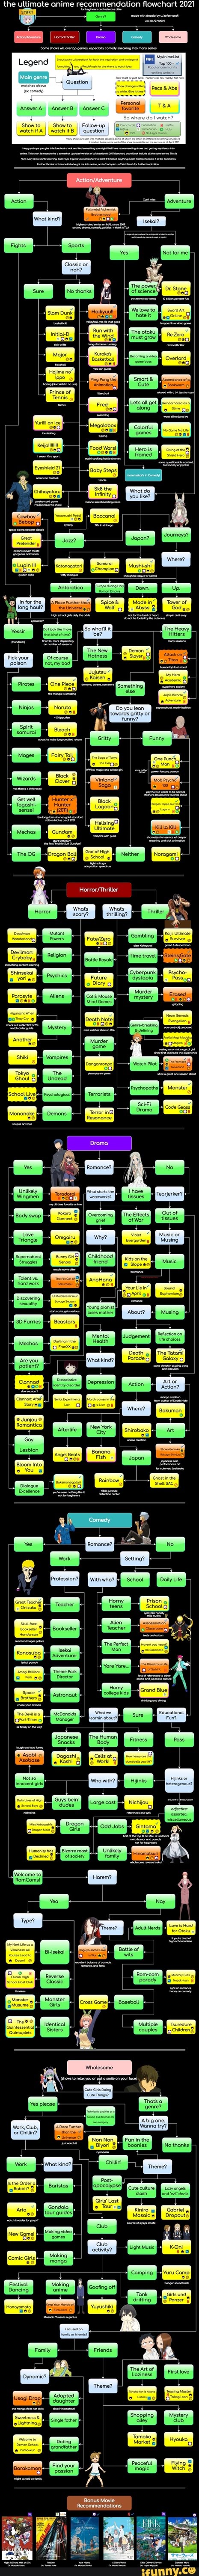 The ultimate anime recommendation flowchart 2021 Juestion Personot Answer  Answer Answer fovorite to. I Followup Show